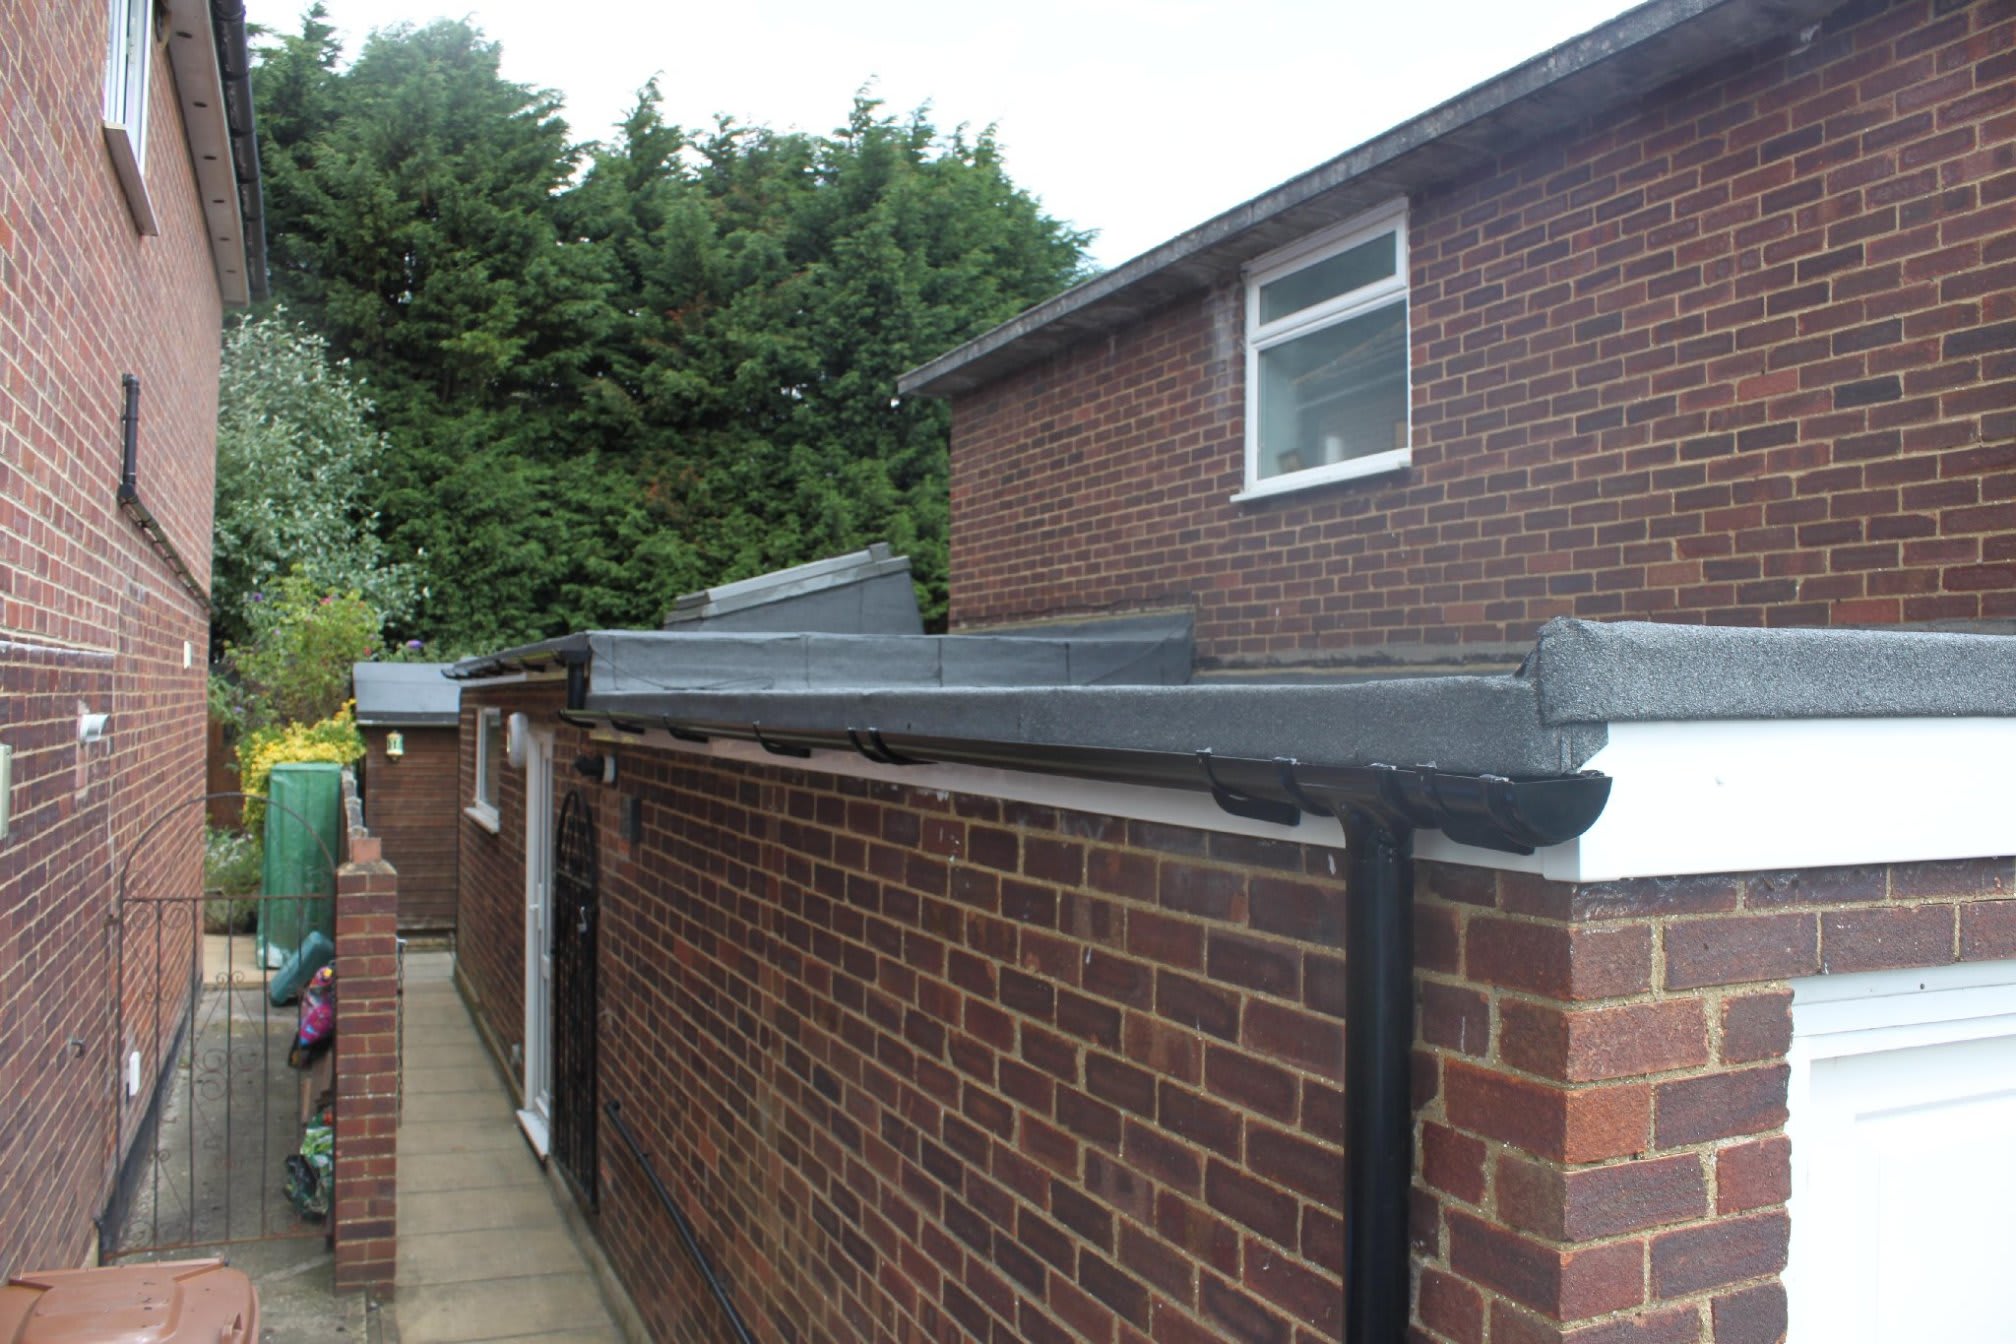 Images Empire UPVC & Roofing Specialists